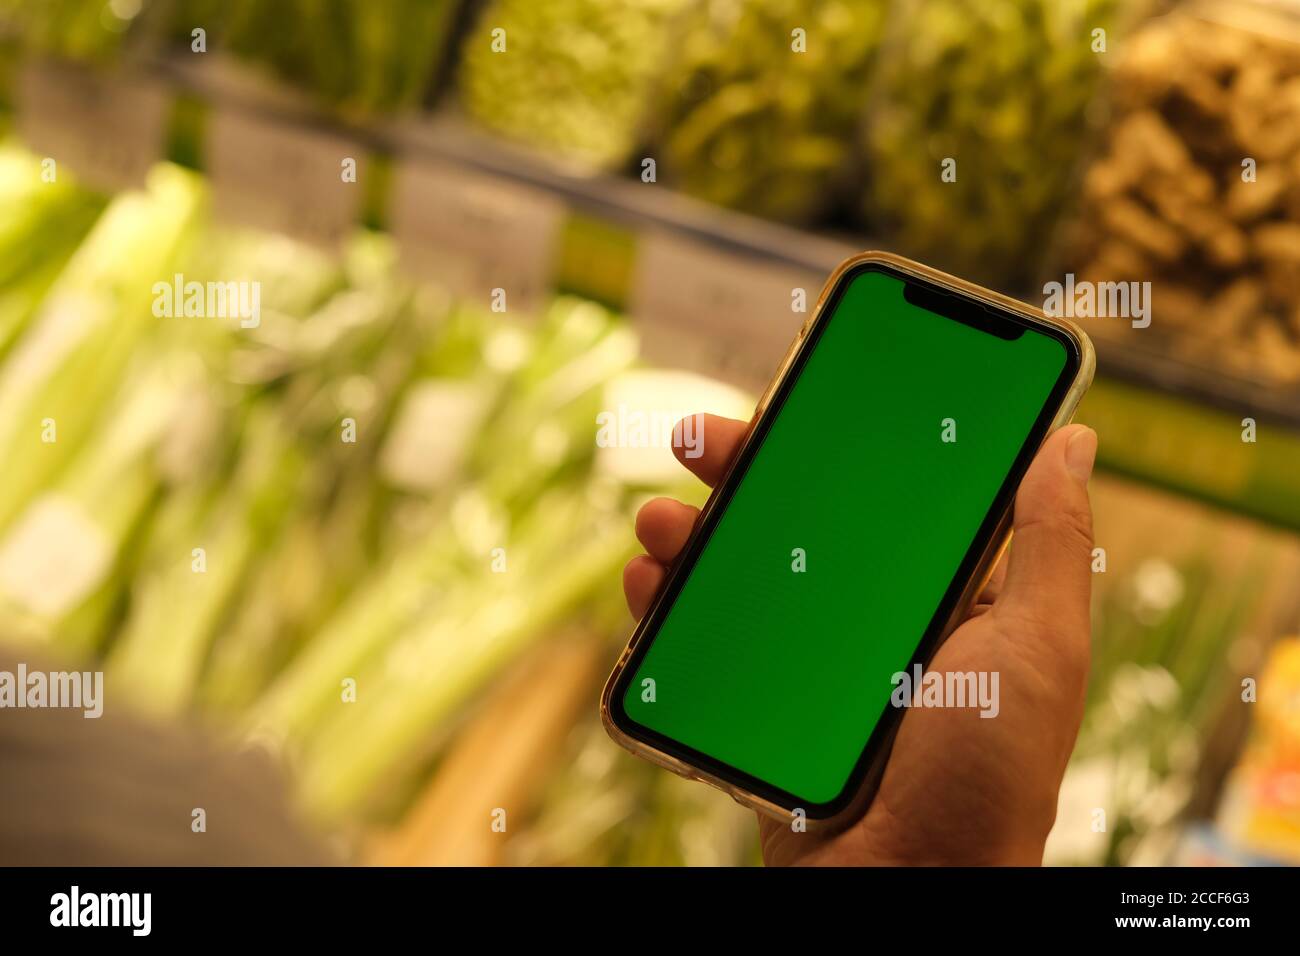 over shoulder of people holding green screen smart phone at grocery store Stock Photo